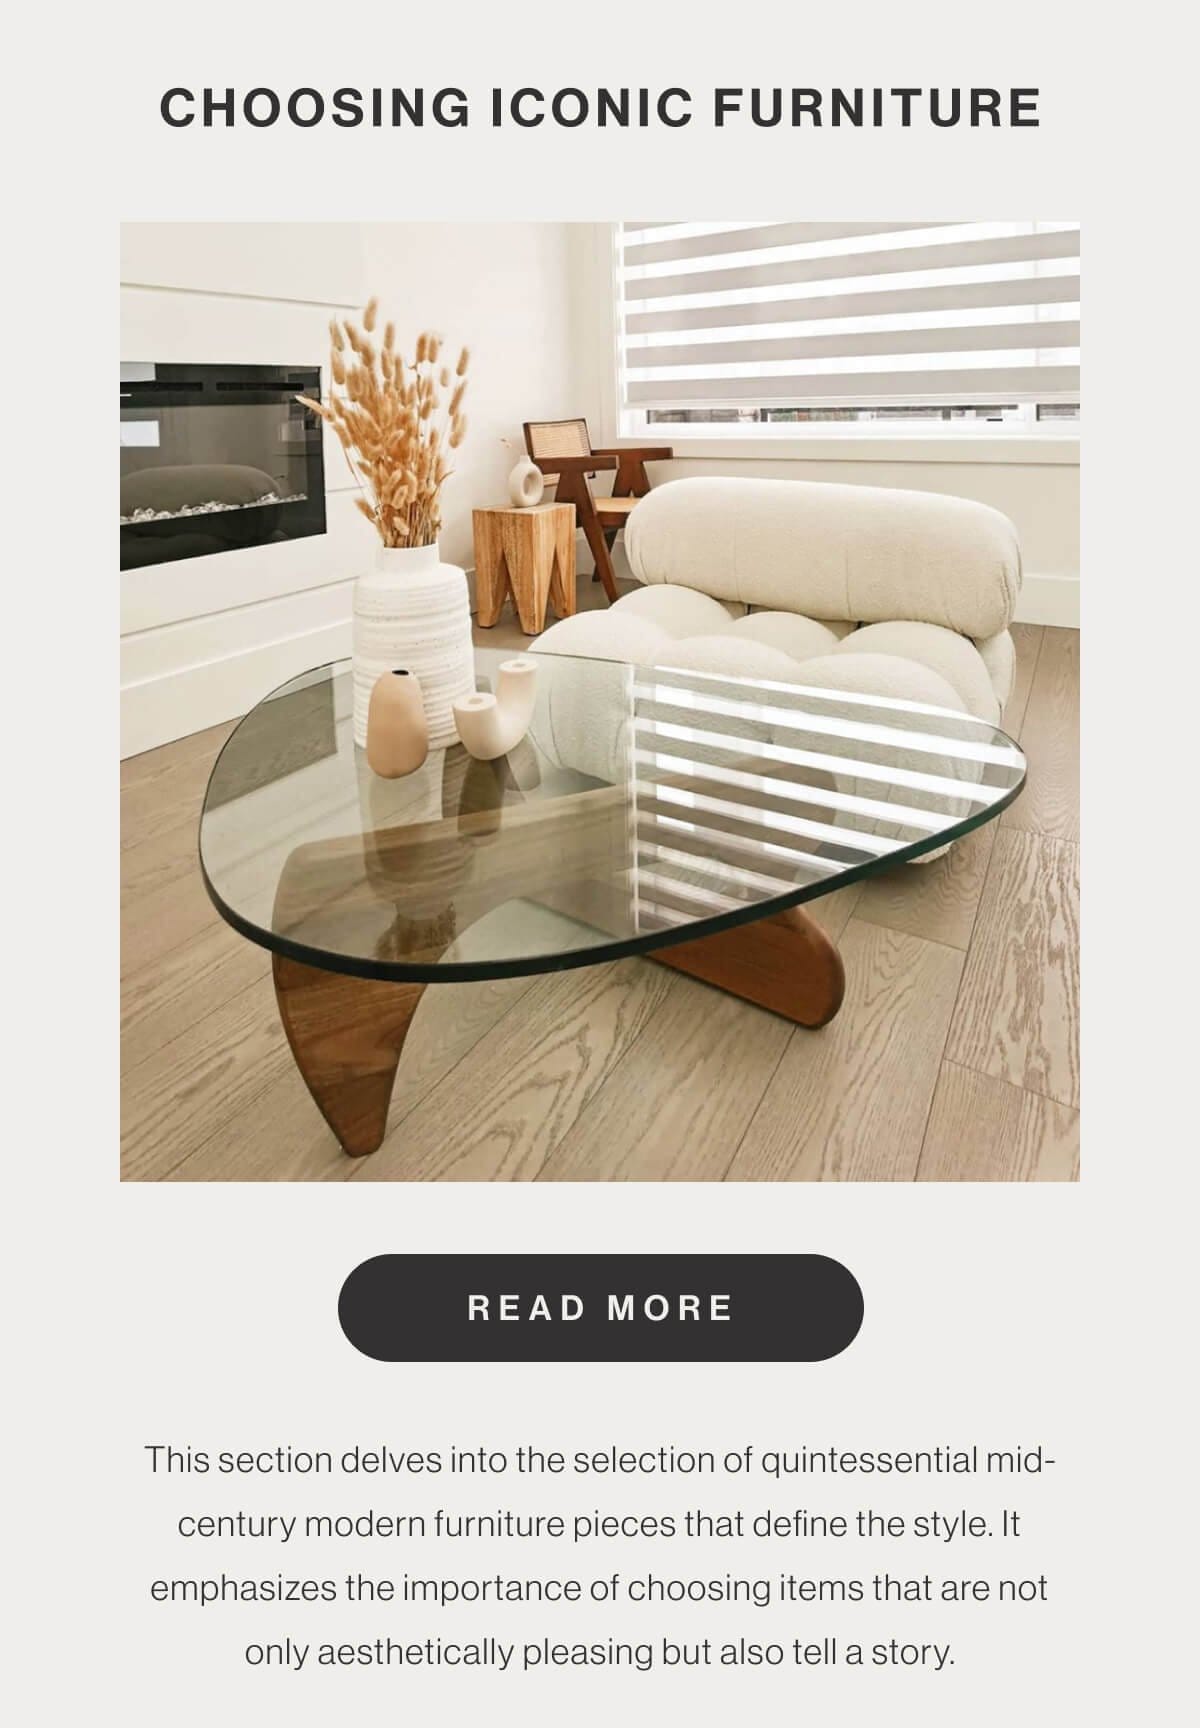 Choosing Iconic Furniture - Read More - This section delves into the selection of quintessential mid-century modern furniture pieces that define the style. It emphasizes the importance of choosing items that are not only aesthetically pleasing but also tell a story.